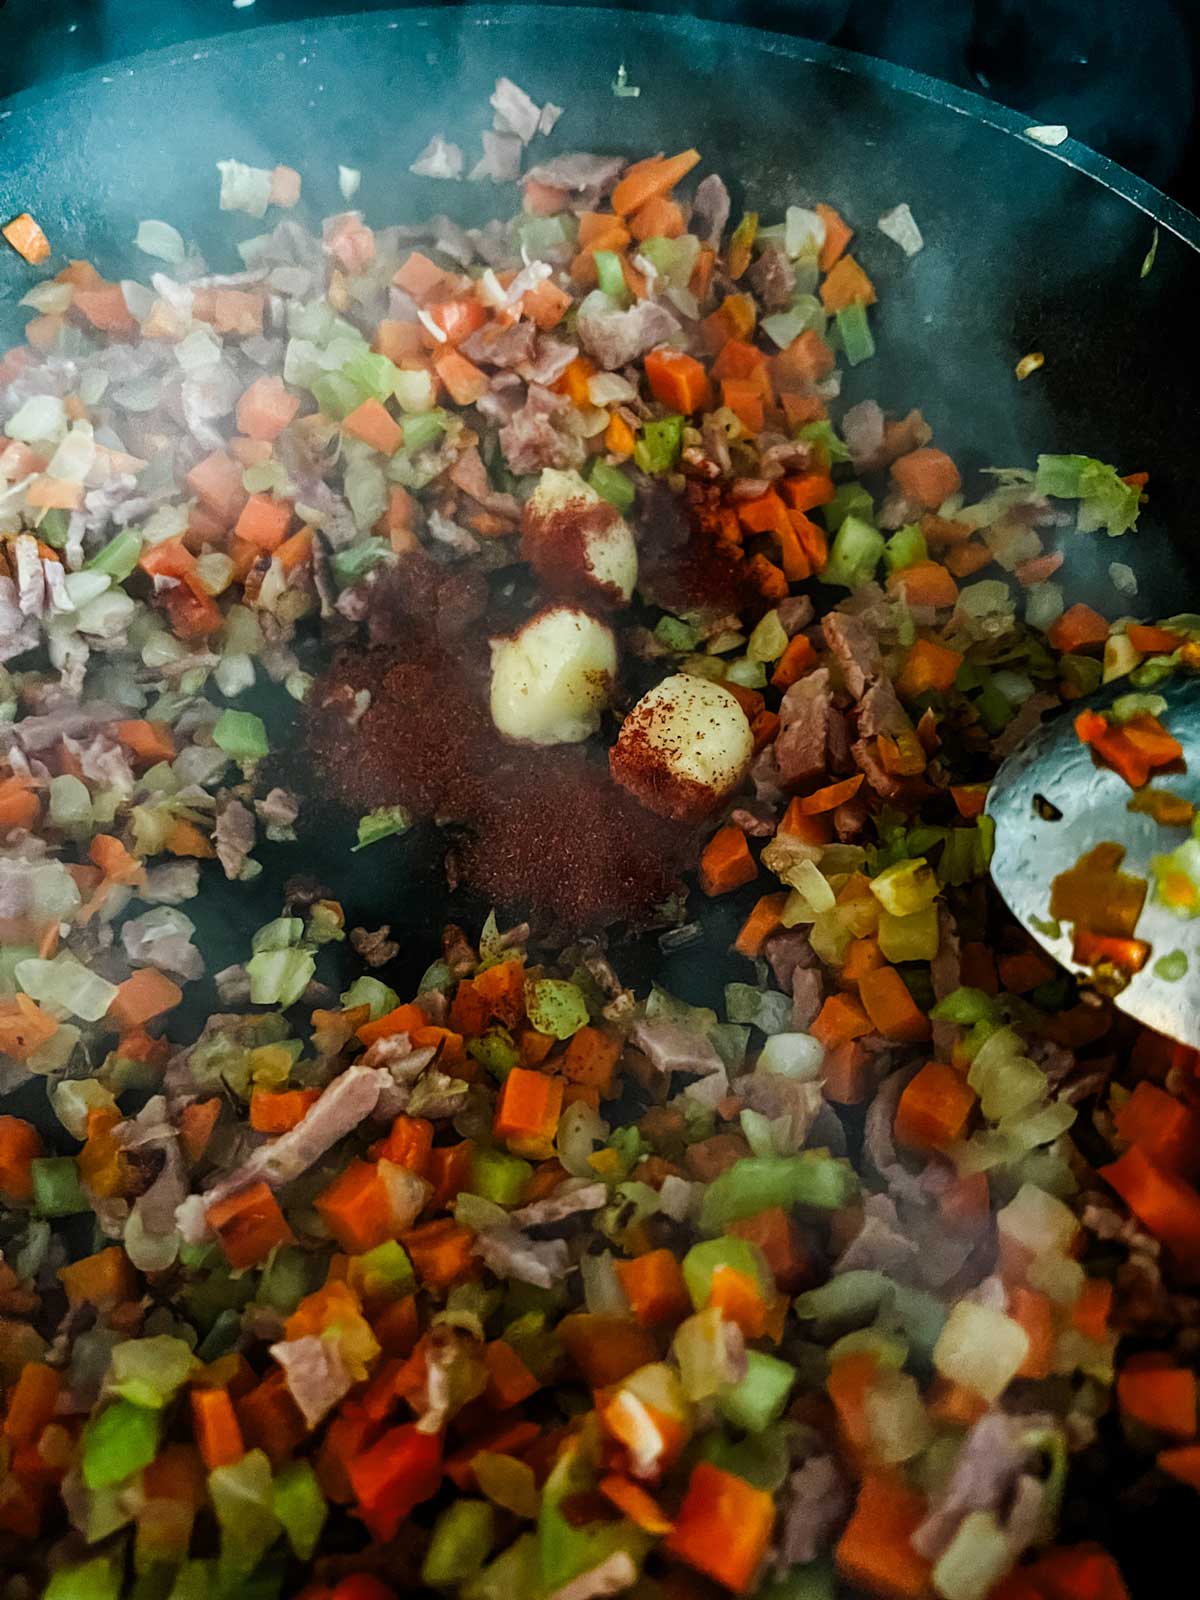 Onion, garlic, carrot, celery, and seasonings in a skillet.